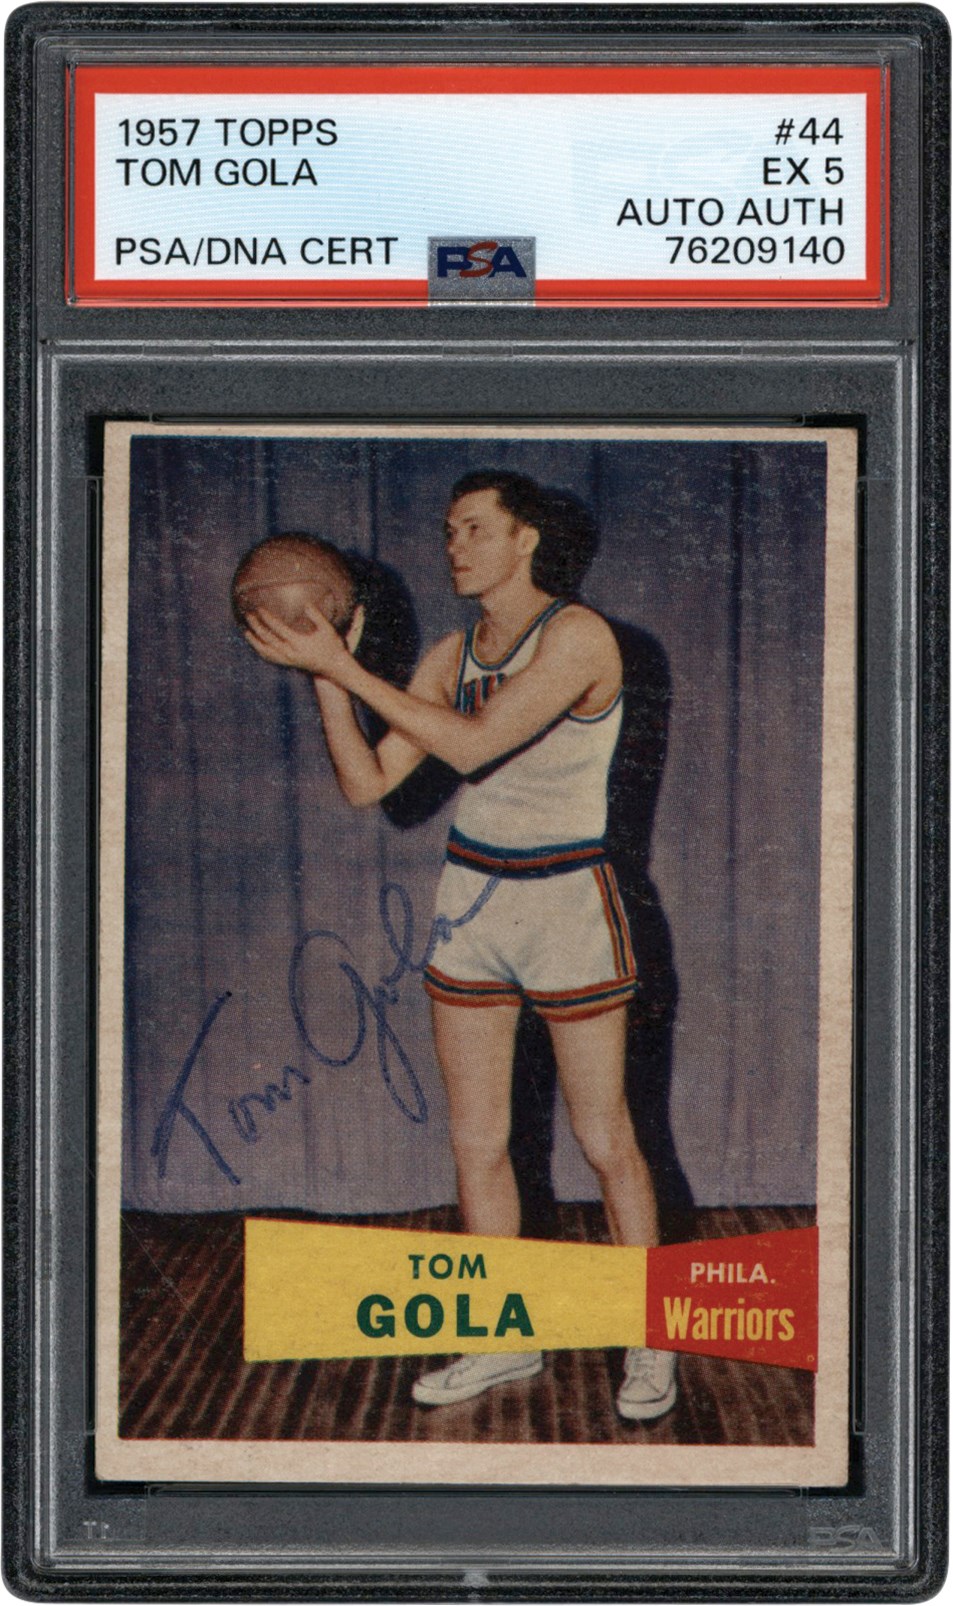 Basketball Cards - 1957 Topps Basketball #44 Tom Gola Signed Rookie Card PSA EX 5 Auto Auth (Pop 1 One Higher)